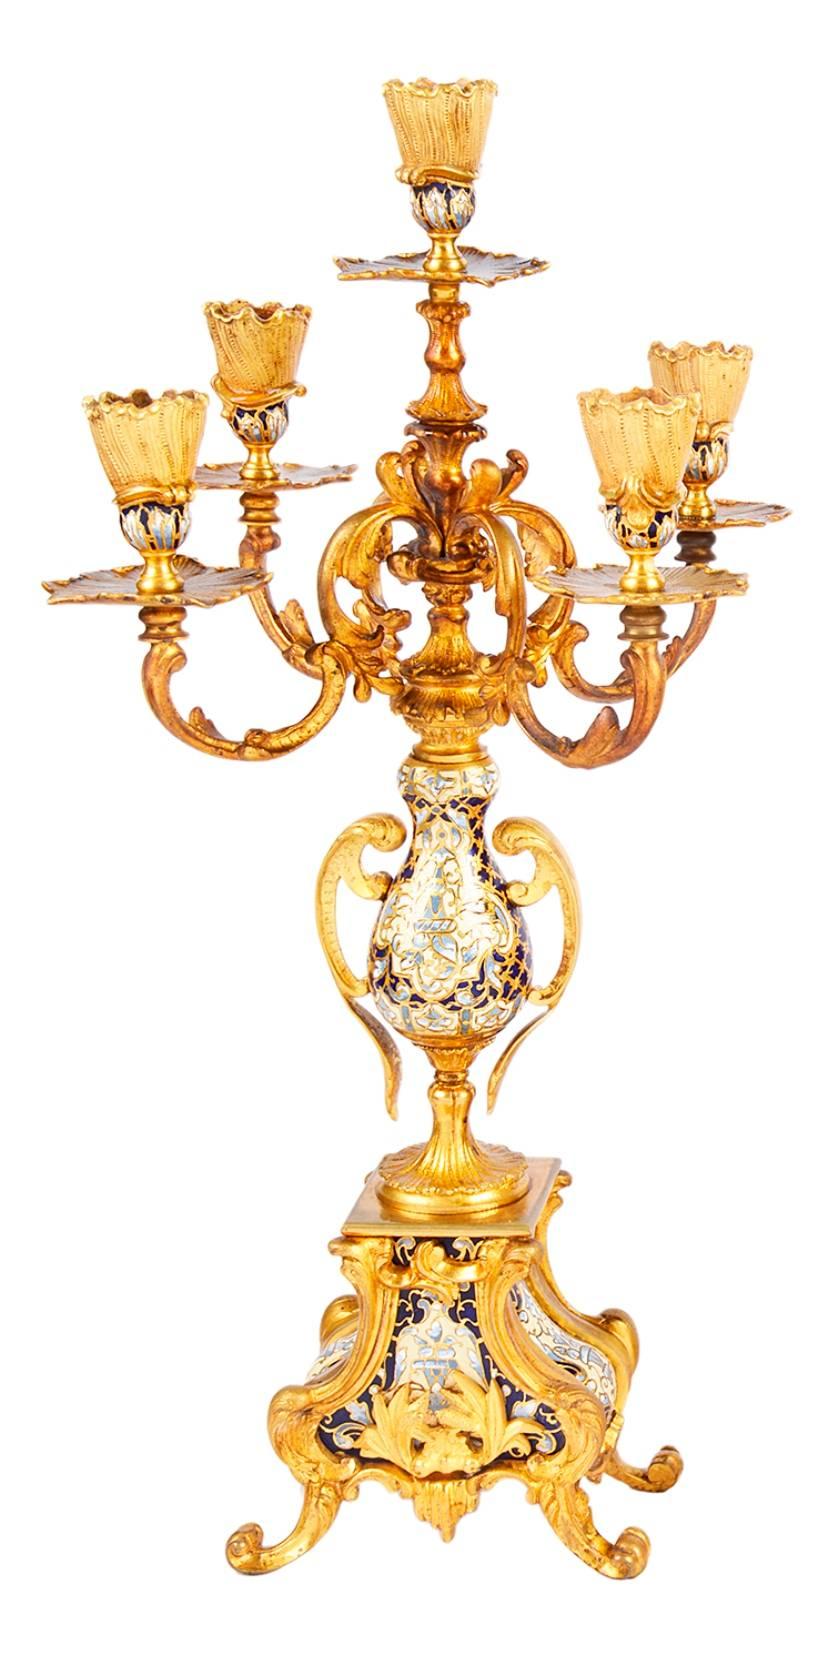 A very good quality, 19th century French gilded ormolu and champleve enamel clock garniture. The clock has a cherub on either side, an urn with swags to the top, 'C' scroll and foliate decoration and champleve enamel. The pair of candelabra each